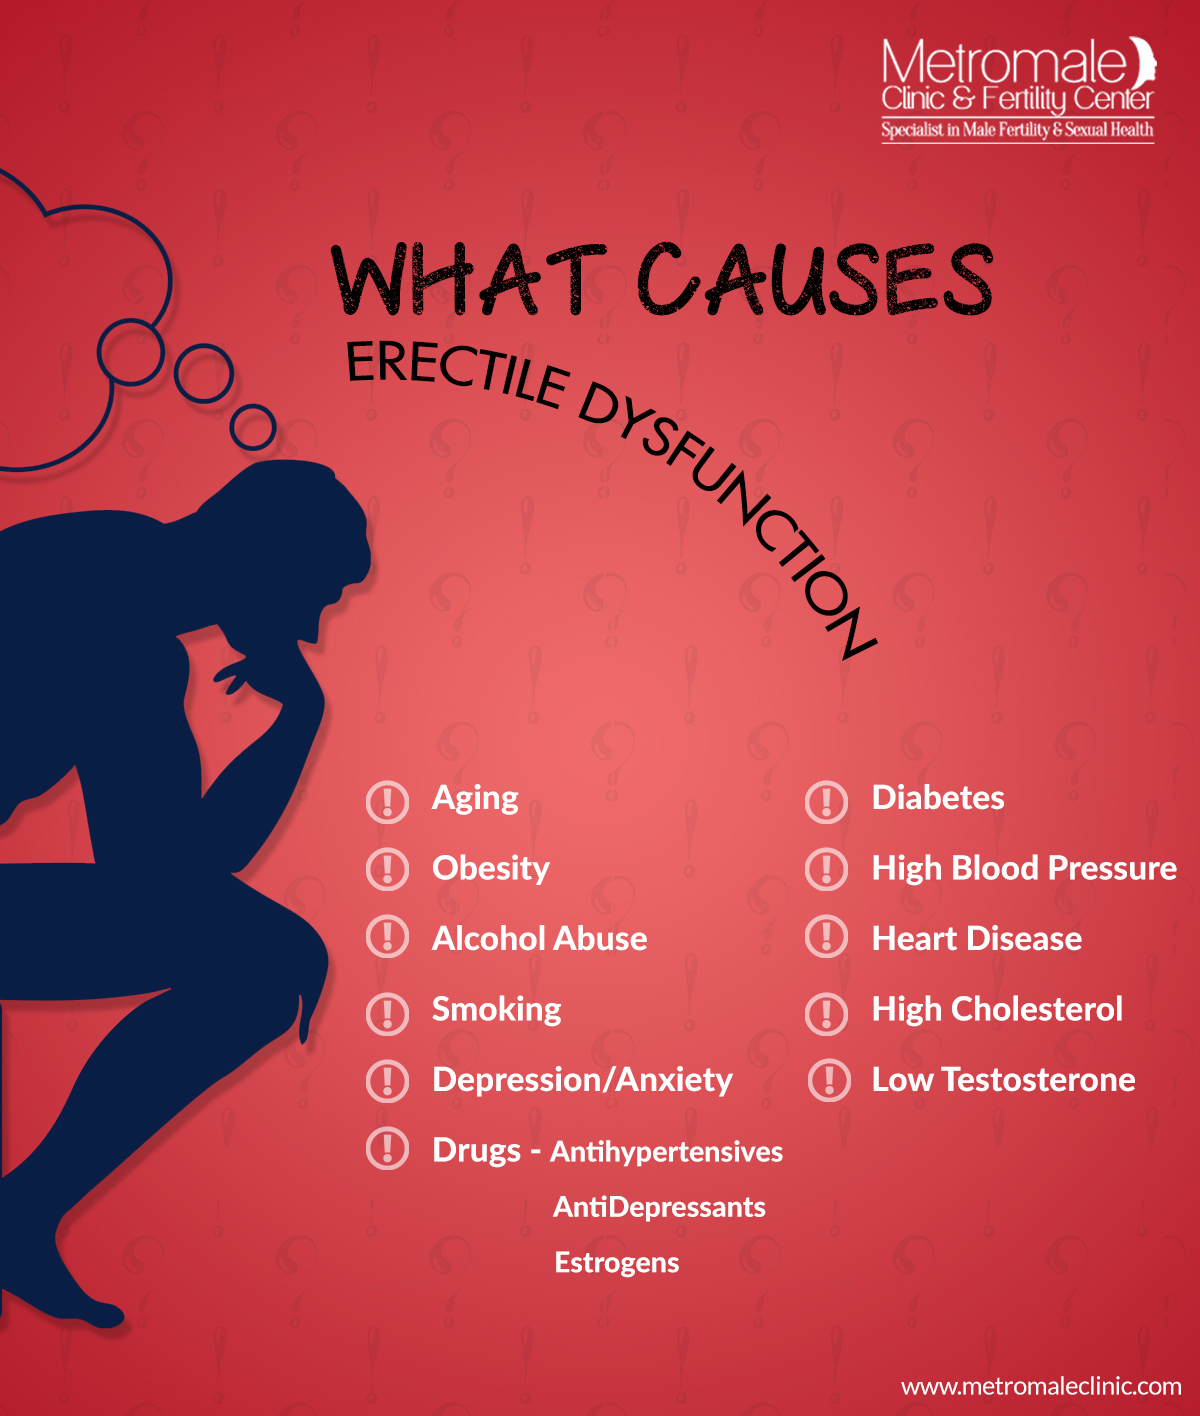 An image depicting the causes and treatment of erectile dysfunction